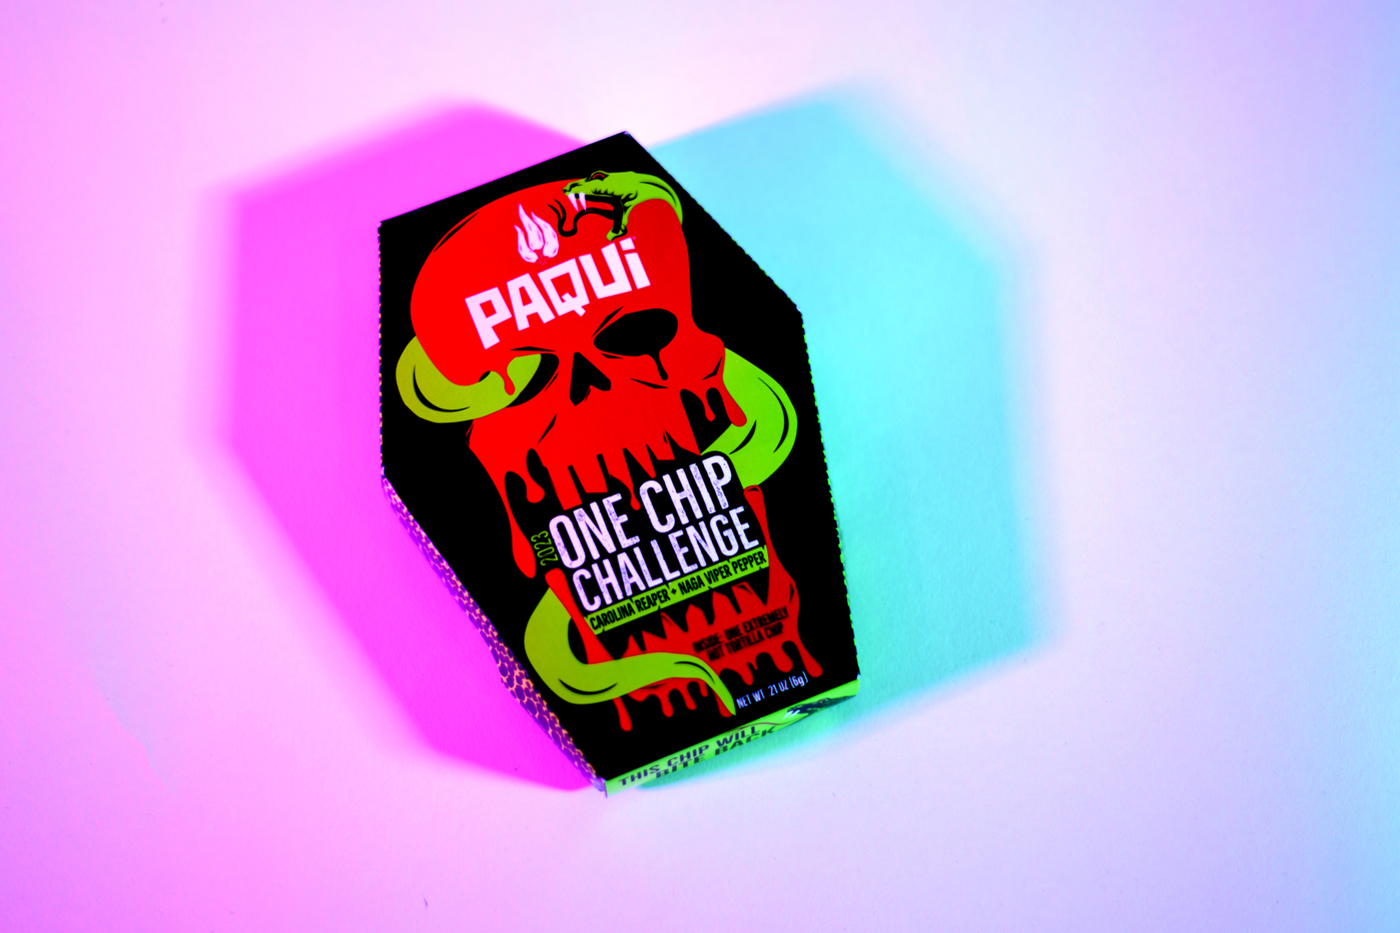 CASE Of 2023 Paqui One Chip Challenge Box Contains 10 PACK (10 Chips)